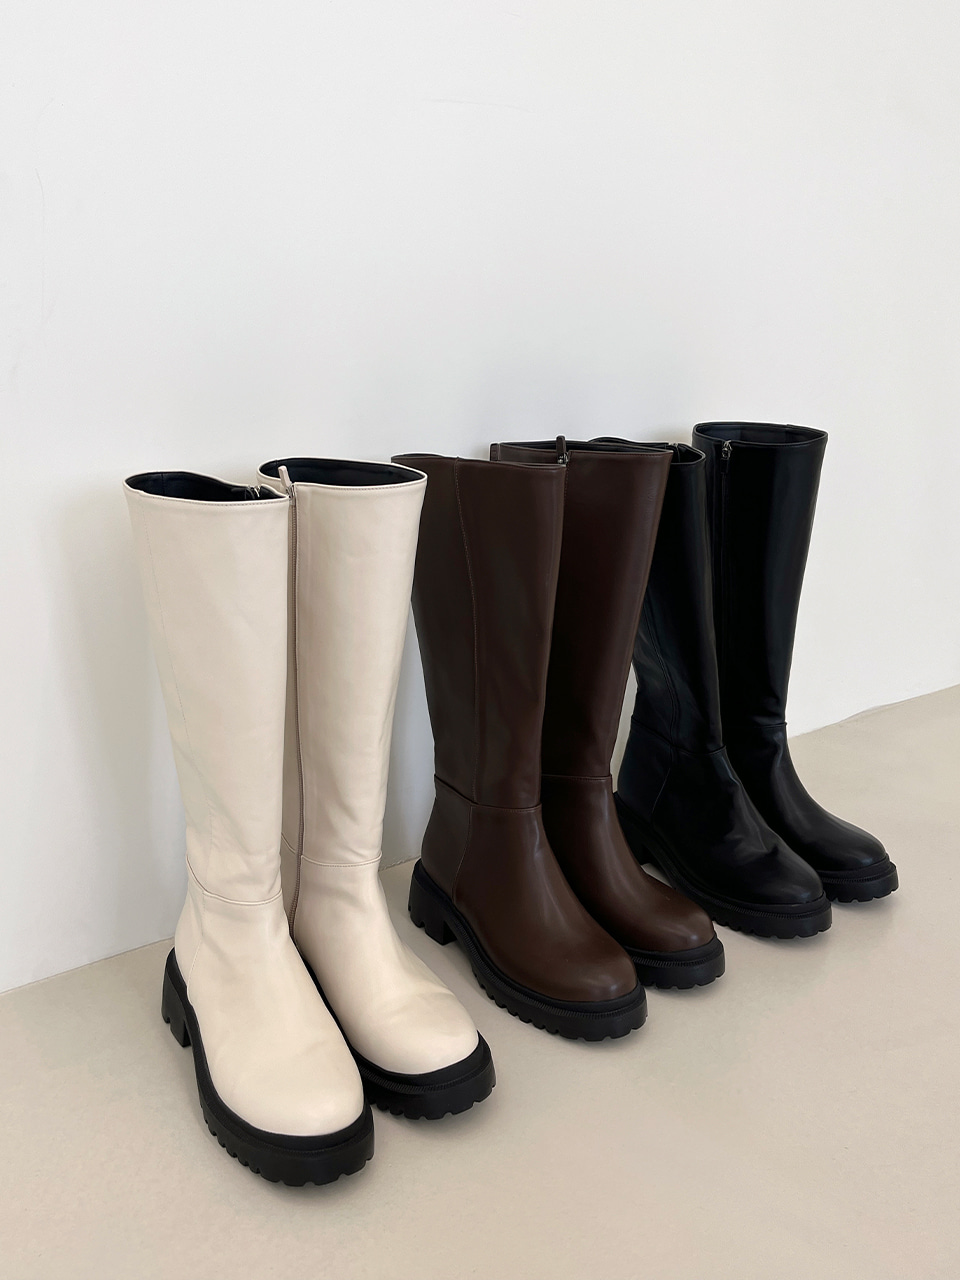 Slim high Boots_Long (4 color)